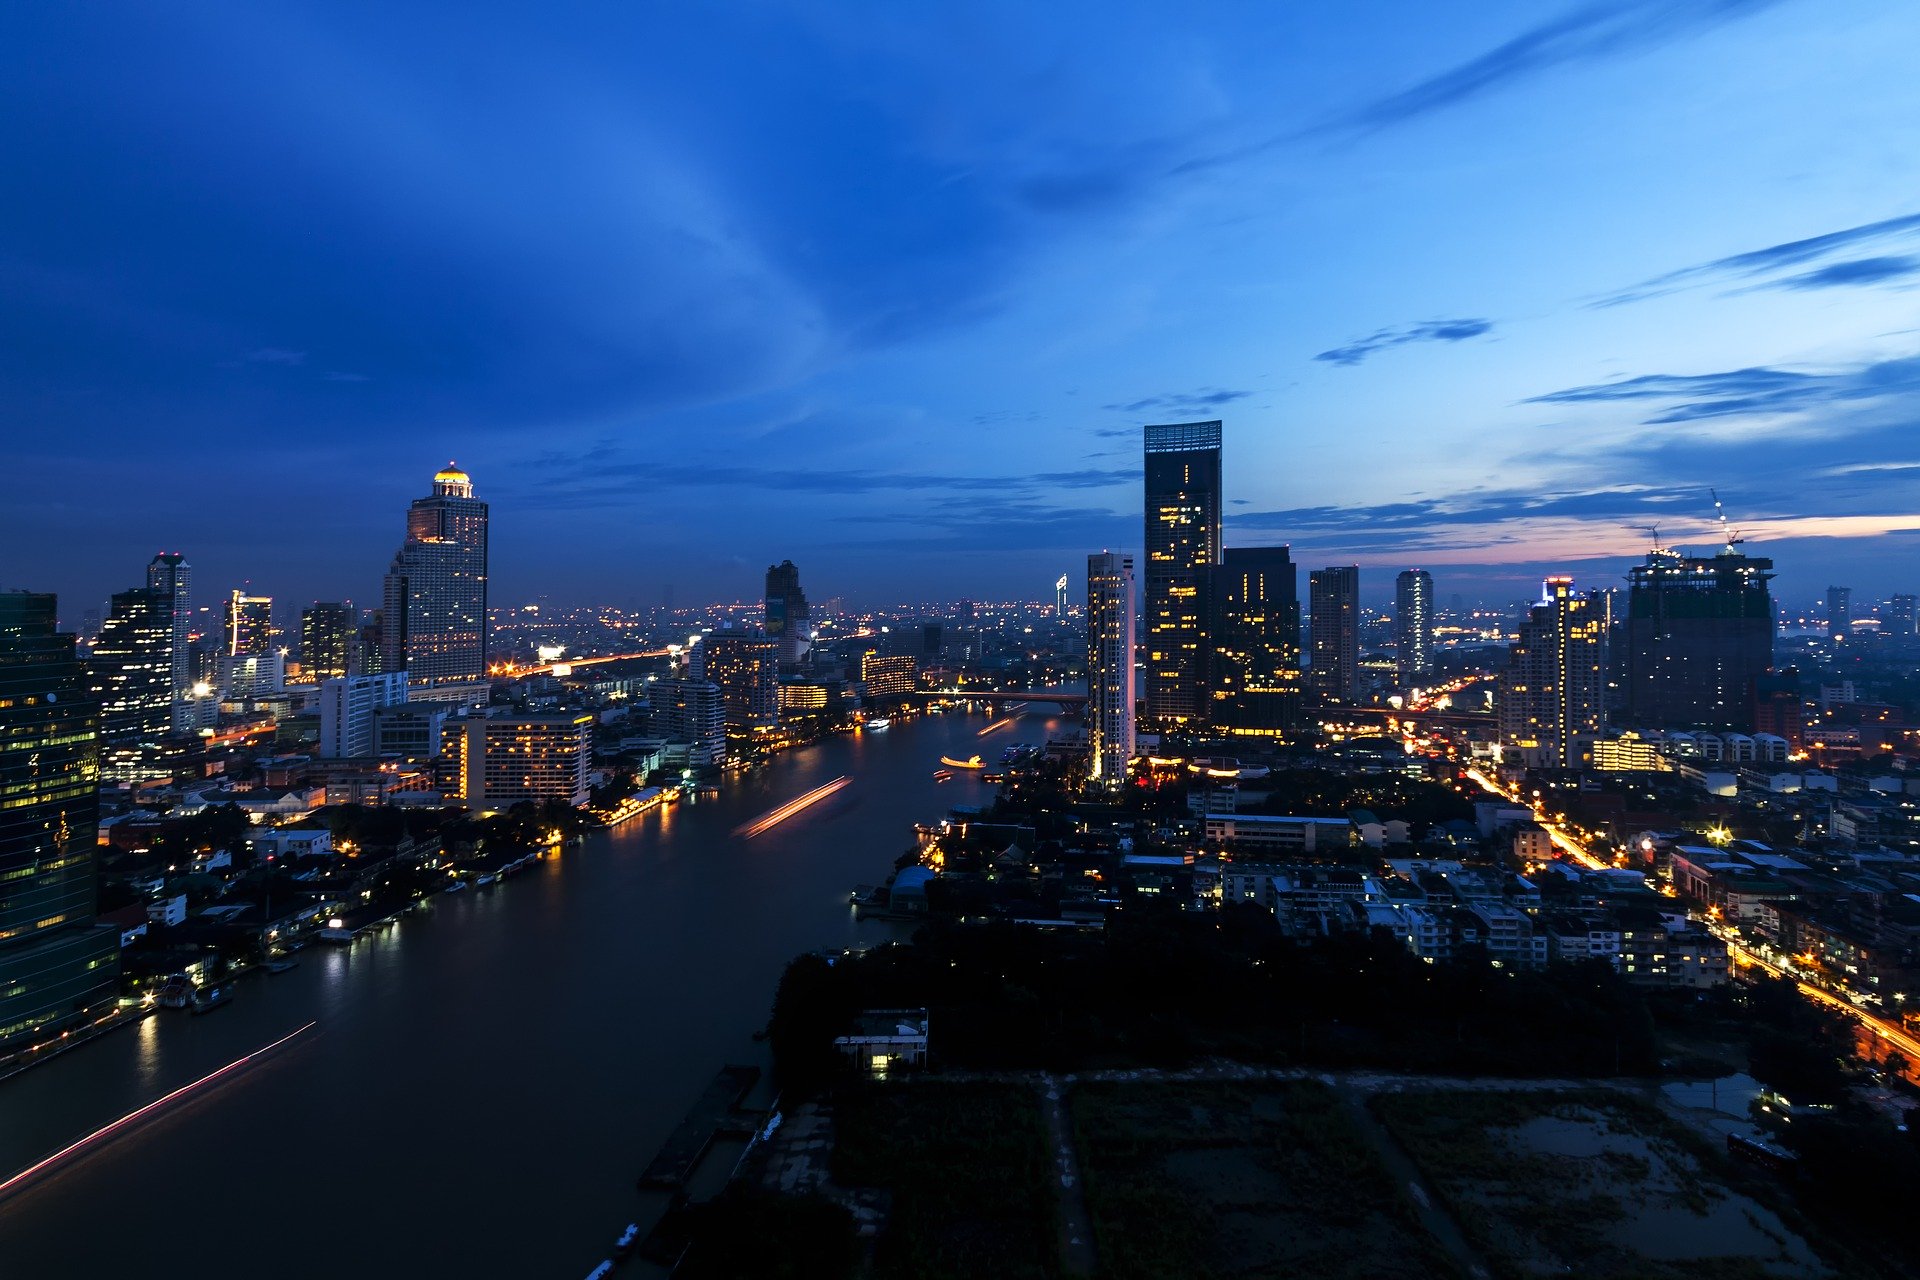 Bangkok Named Number One Destination for Travellers for Fourth Year Running